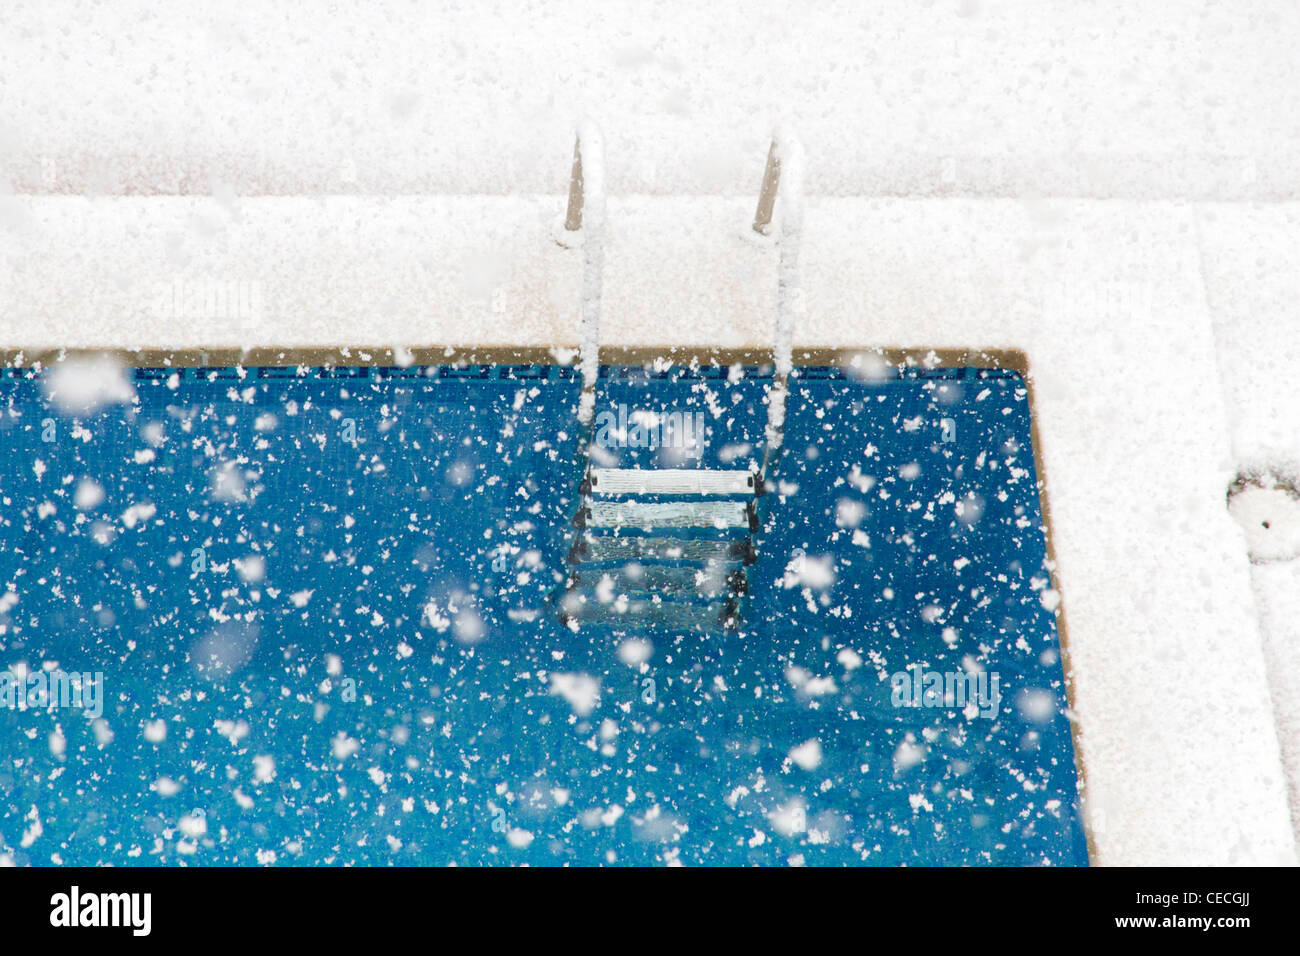 Snowing on Swimming pool outdoor Stock Photo